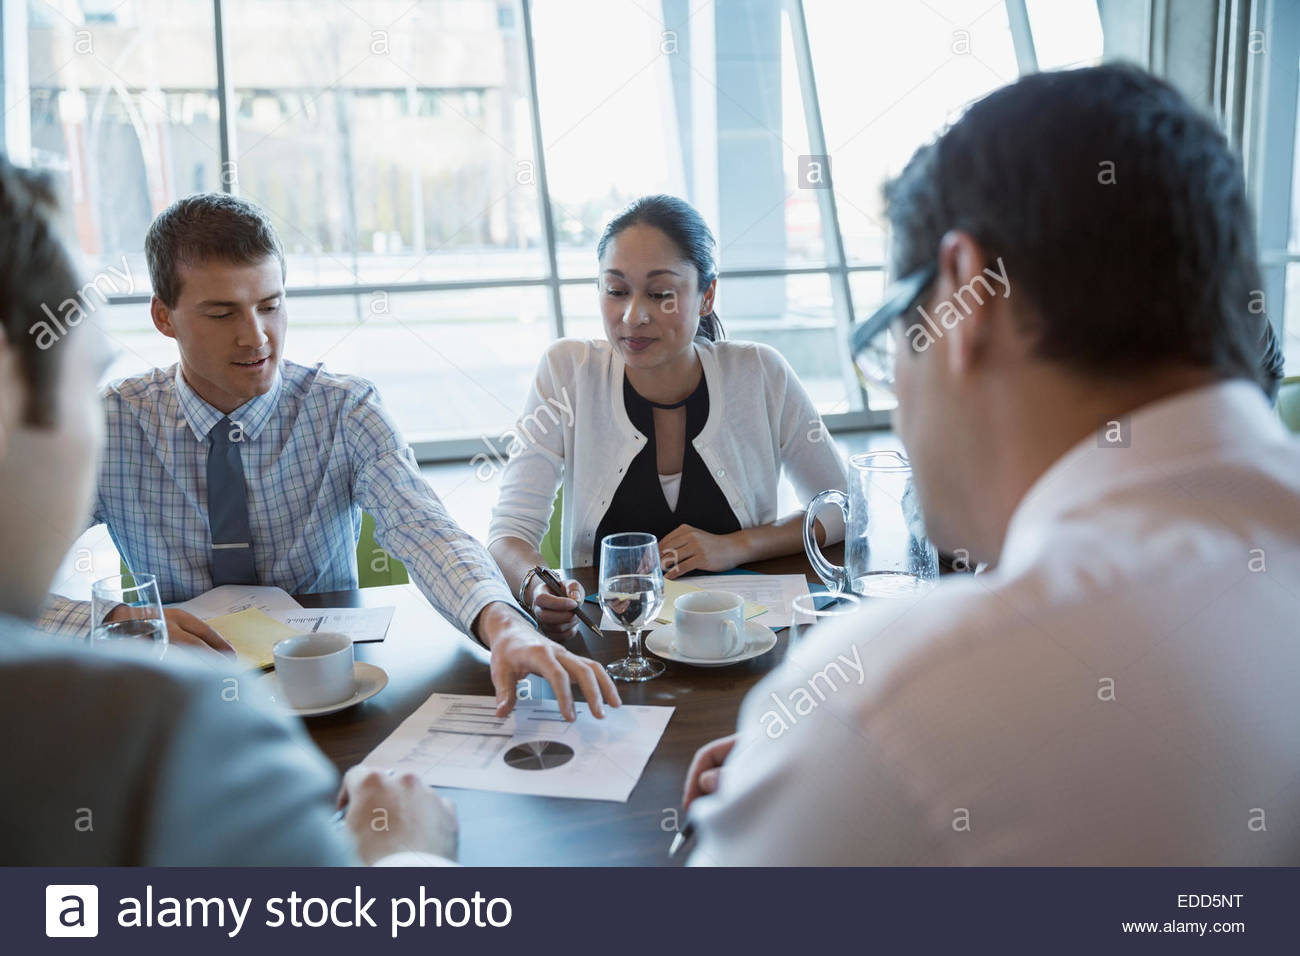 Business people discussing data in conference room meeting Stock Photo